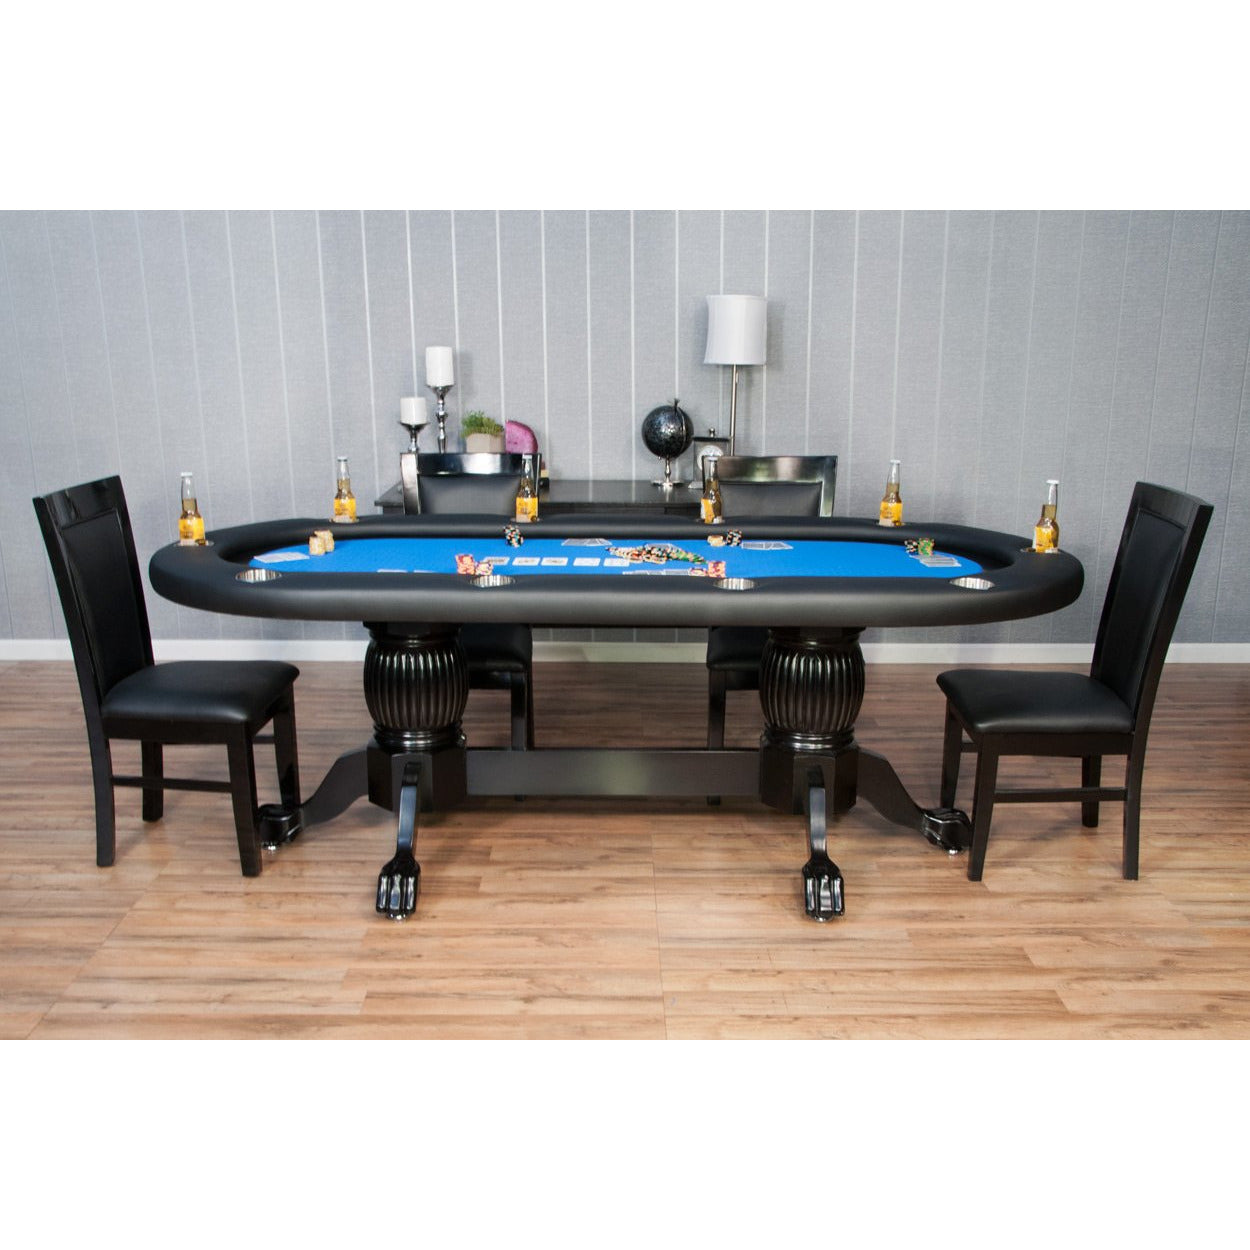 Bbo the elite poker table with matching chairs